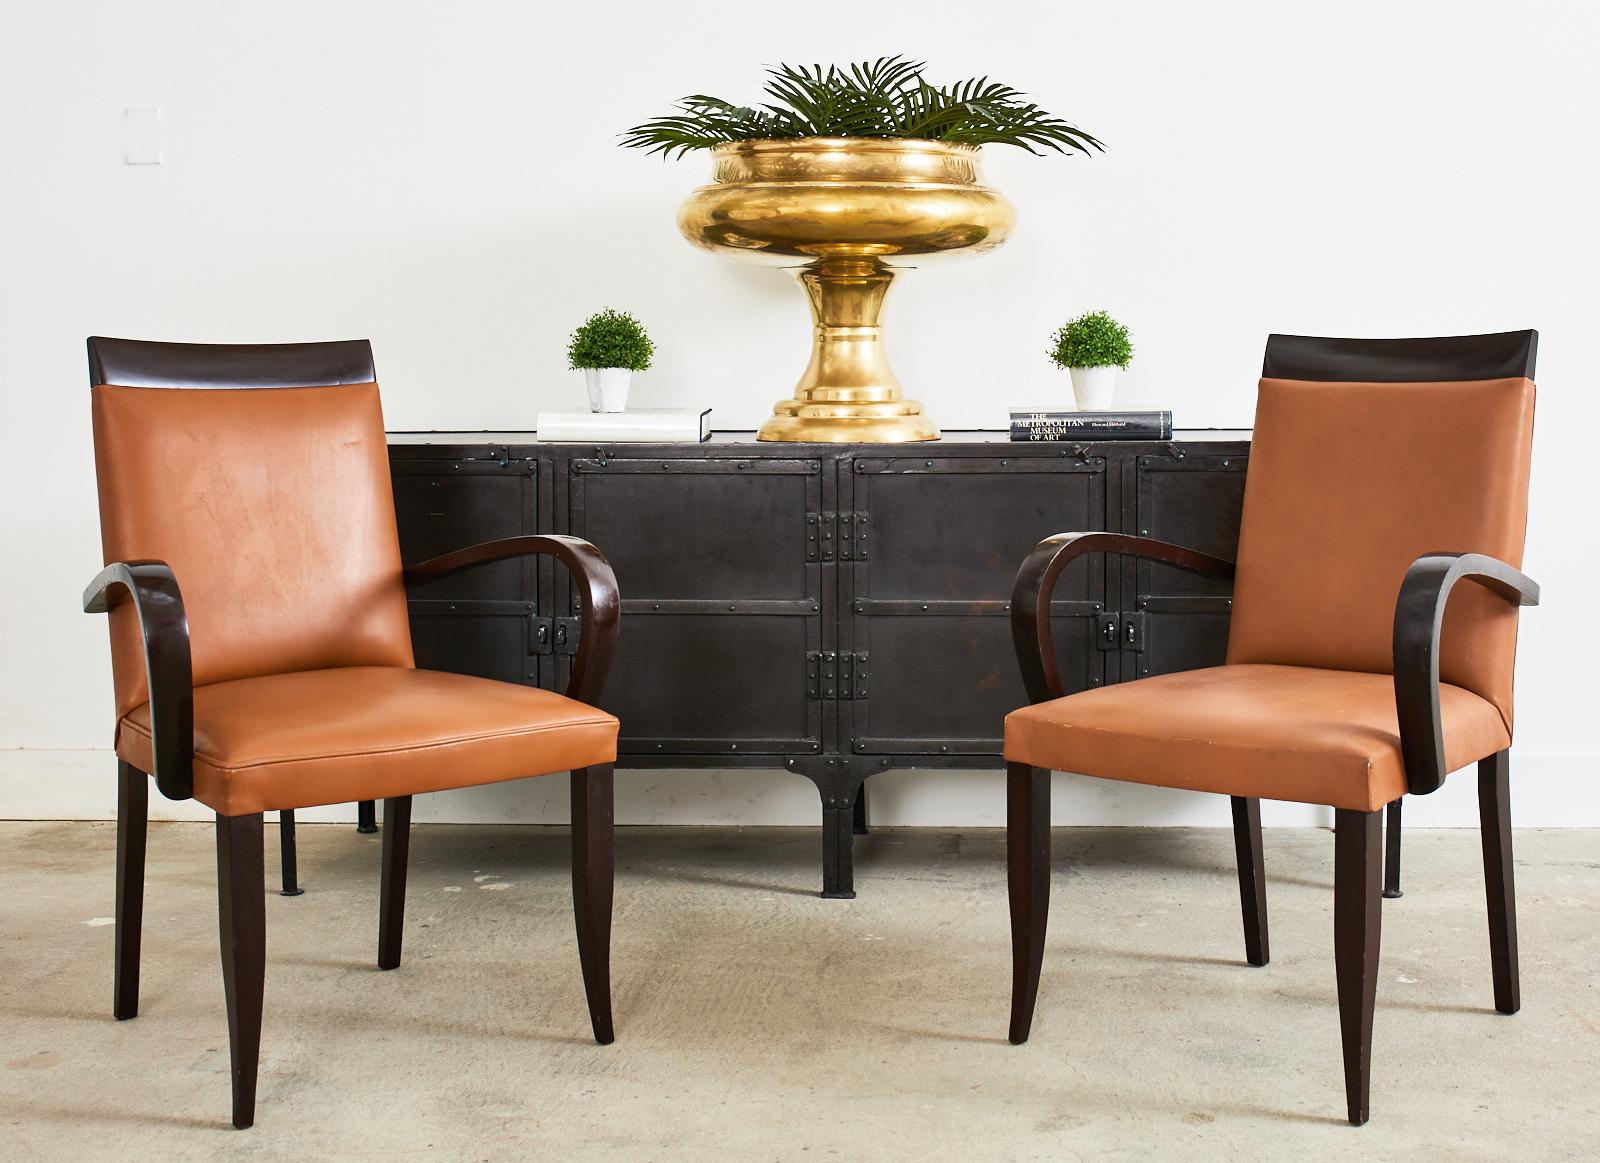 Dramatic pair of hardwood dining armchairs designed by Dakota Jackson known as PFM Royale chairs. The pair feature whimsical bowed arms conjoined to a generous seating area with cognac leather upholstery. Inspired by 1920s art deco the tops of the